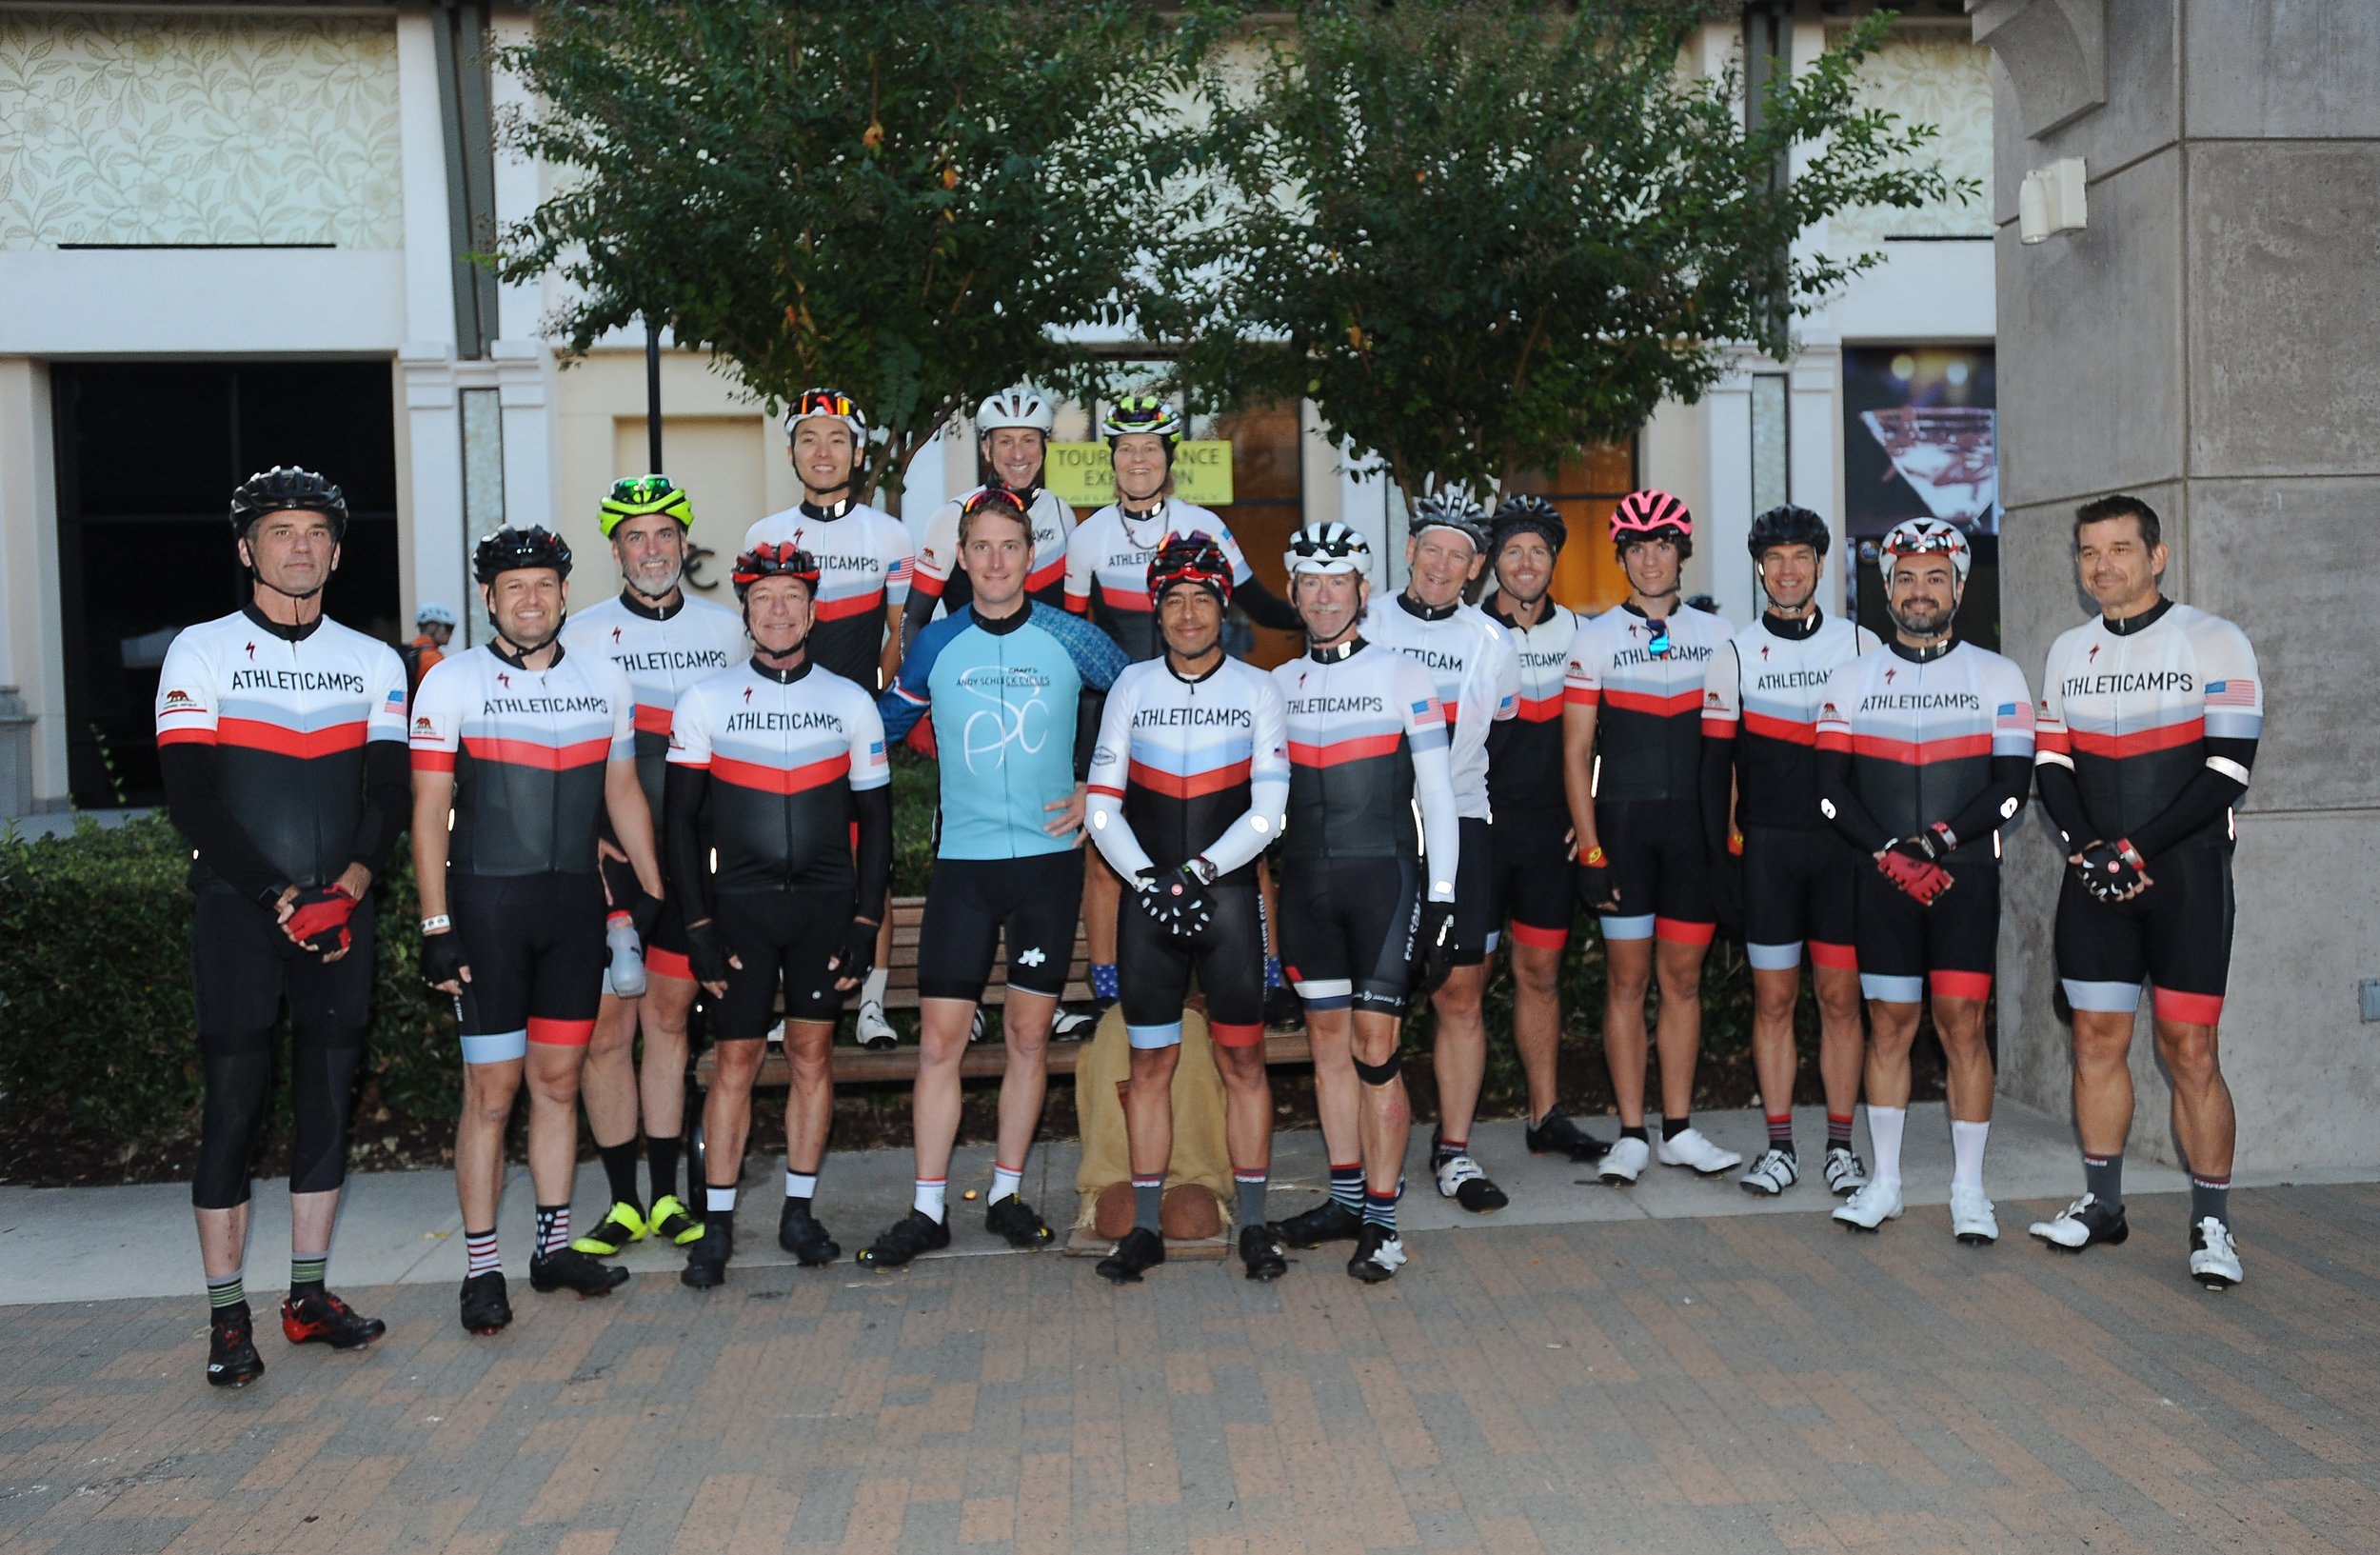 Athleticamps with 2010 TDF champion Andy Schleck prior to the event